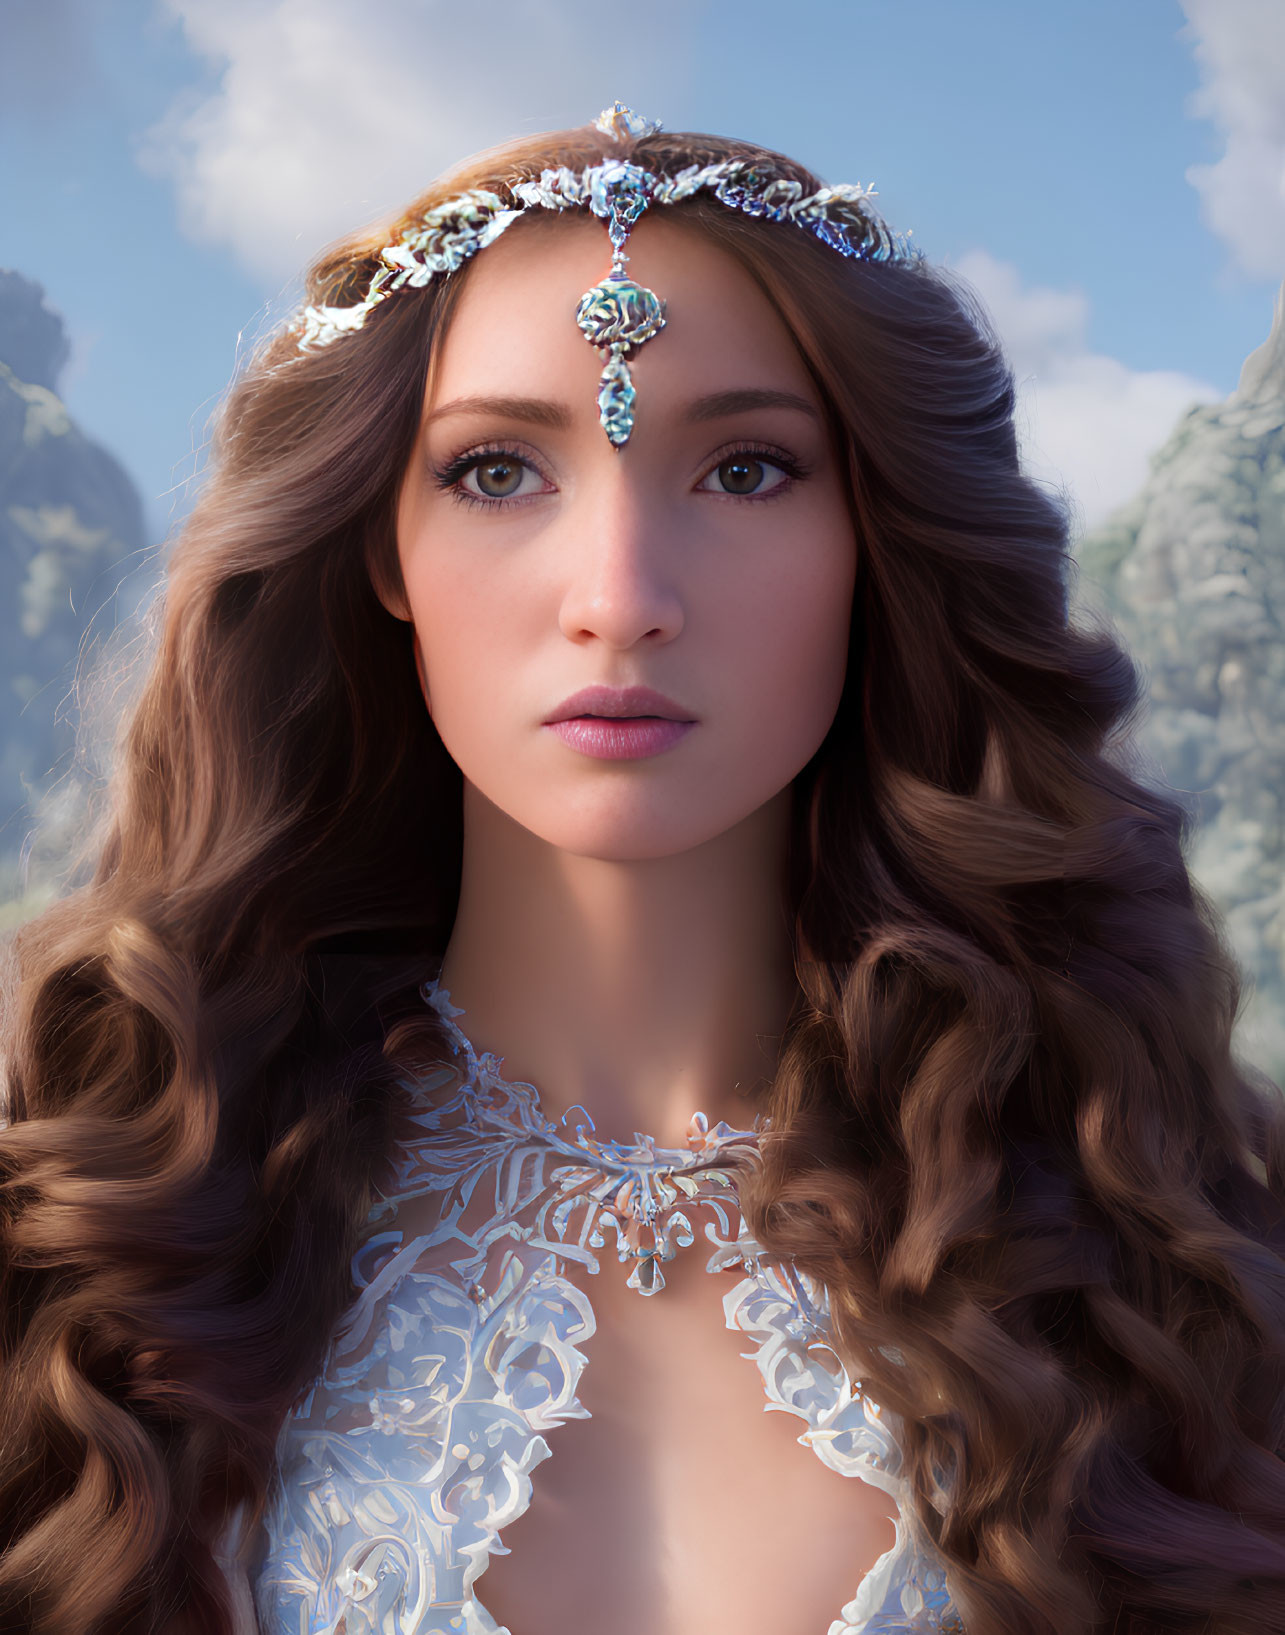 Portrait of young woman with brown hair and ornate headpiece against blue skies and rugged cliffs